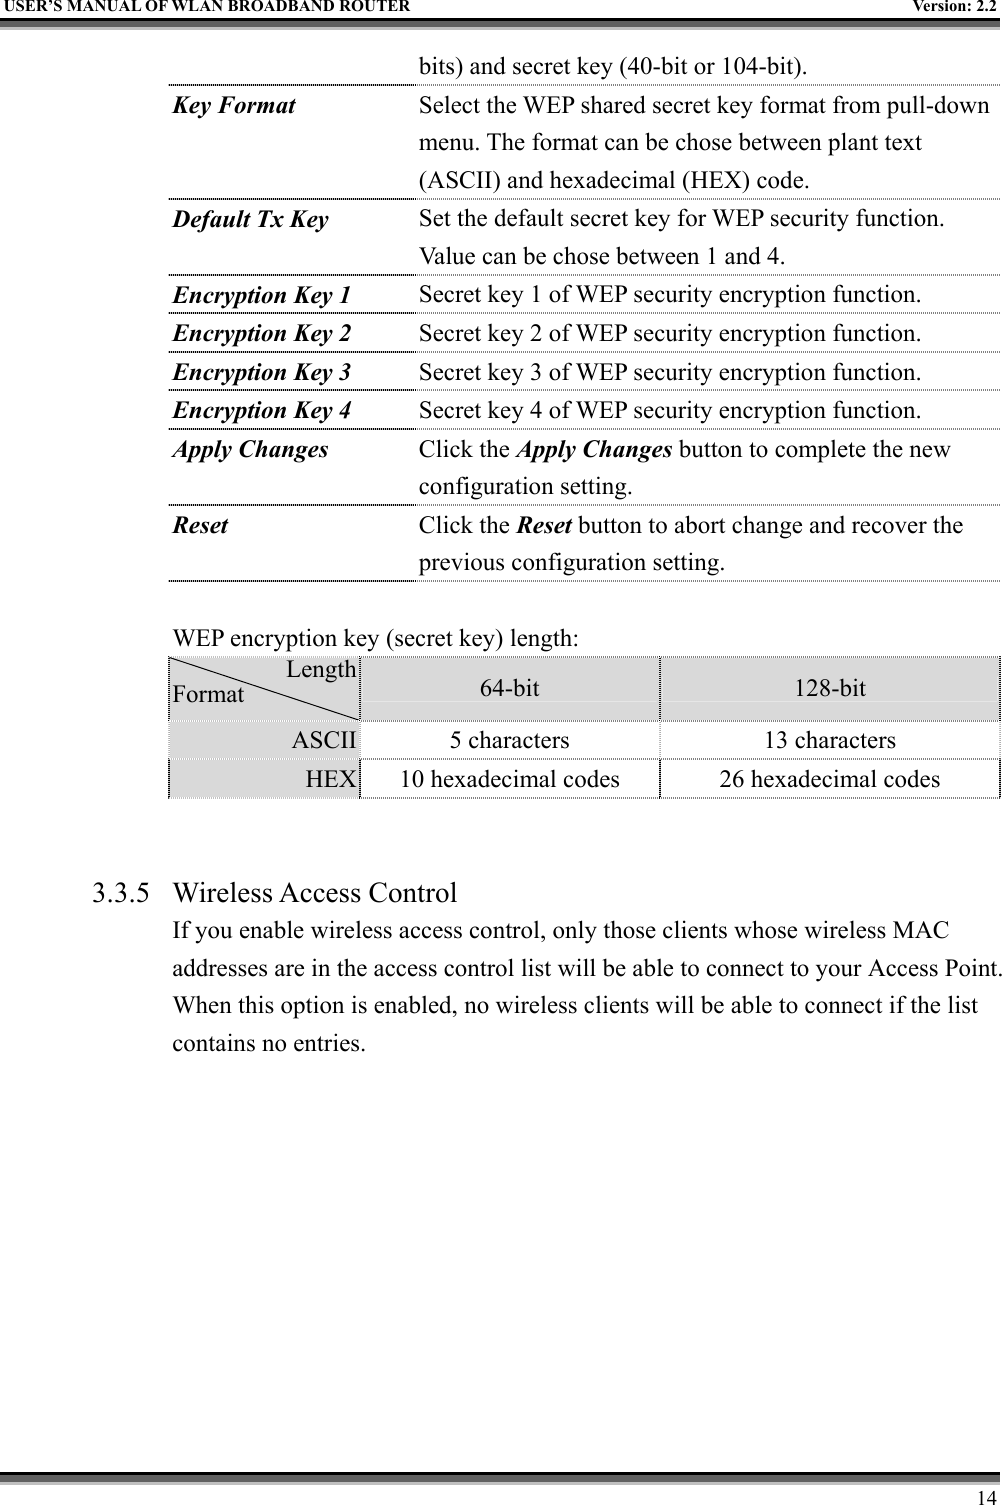   USER’S MANUAL OF WLAN BROADBAND ROUTER    Version: 2.2     14 bits) and secret key (40-bit or 104-bit). Key Format Select the WEP shared secret key format from pull-down menu. The format can be chose between plant text (ASCII) and hexadecimal (HEX) code. Default Tx Key Set the default secret key for WEP security function. Value can be chose between 1 and 4. Encryption Key 1 Secret key 1 of WEP security encryption function. Encryption Key 2  Secret key 2 of WEP security encryption function. Encryption Key 3  Secret key 3 of WEP security encryption function. Encryption Key 4  Secret key 4 of WEP security encryption function. Apply Changes Click the Apply Changes button to complete the new configuration setting. Reset  Click the Reset button to abort change and recover the previous configuration setting.  WEP encryption key (secret key) length: Length Format  64-bit  128-bit ASCII  5 characters  13 characters HEX  10 hexadecimal codes    26 hexadecimal codes   3.3.5 Wireless Access Control If you enable wireless access control, only those clients whose wireless MAC addresses are in the access control list will be able to connect to your Access Point. When this option is enabled, no wireless clients will be able to connect if the list contains no entries. 